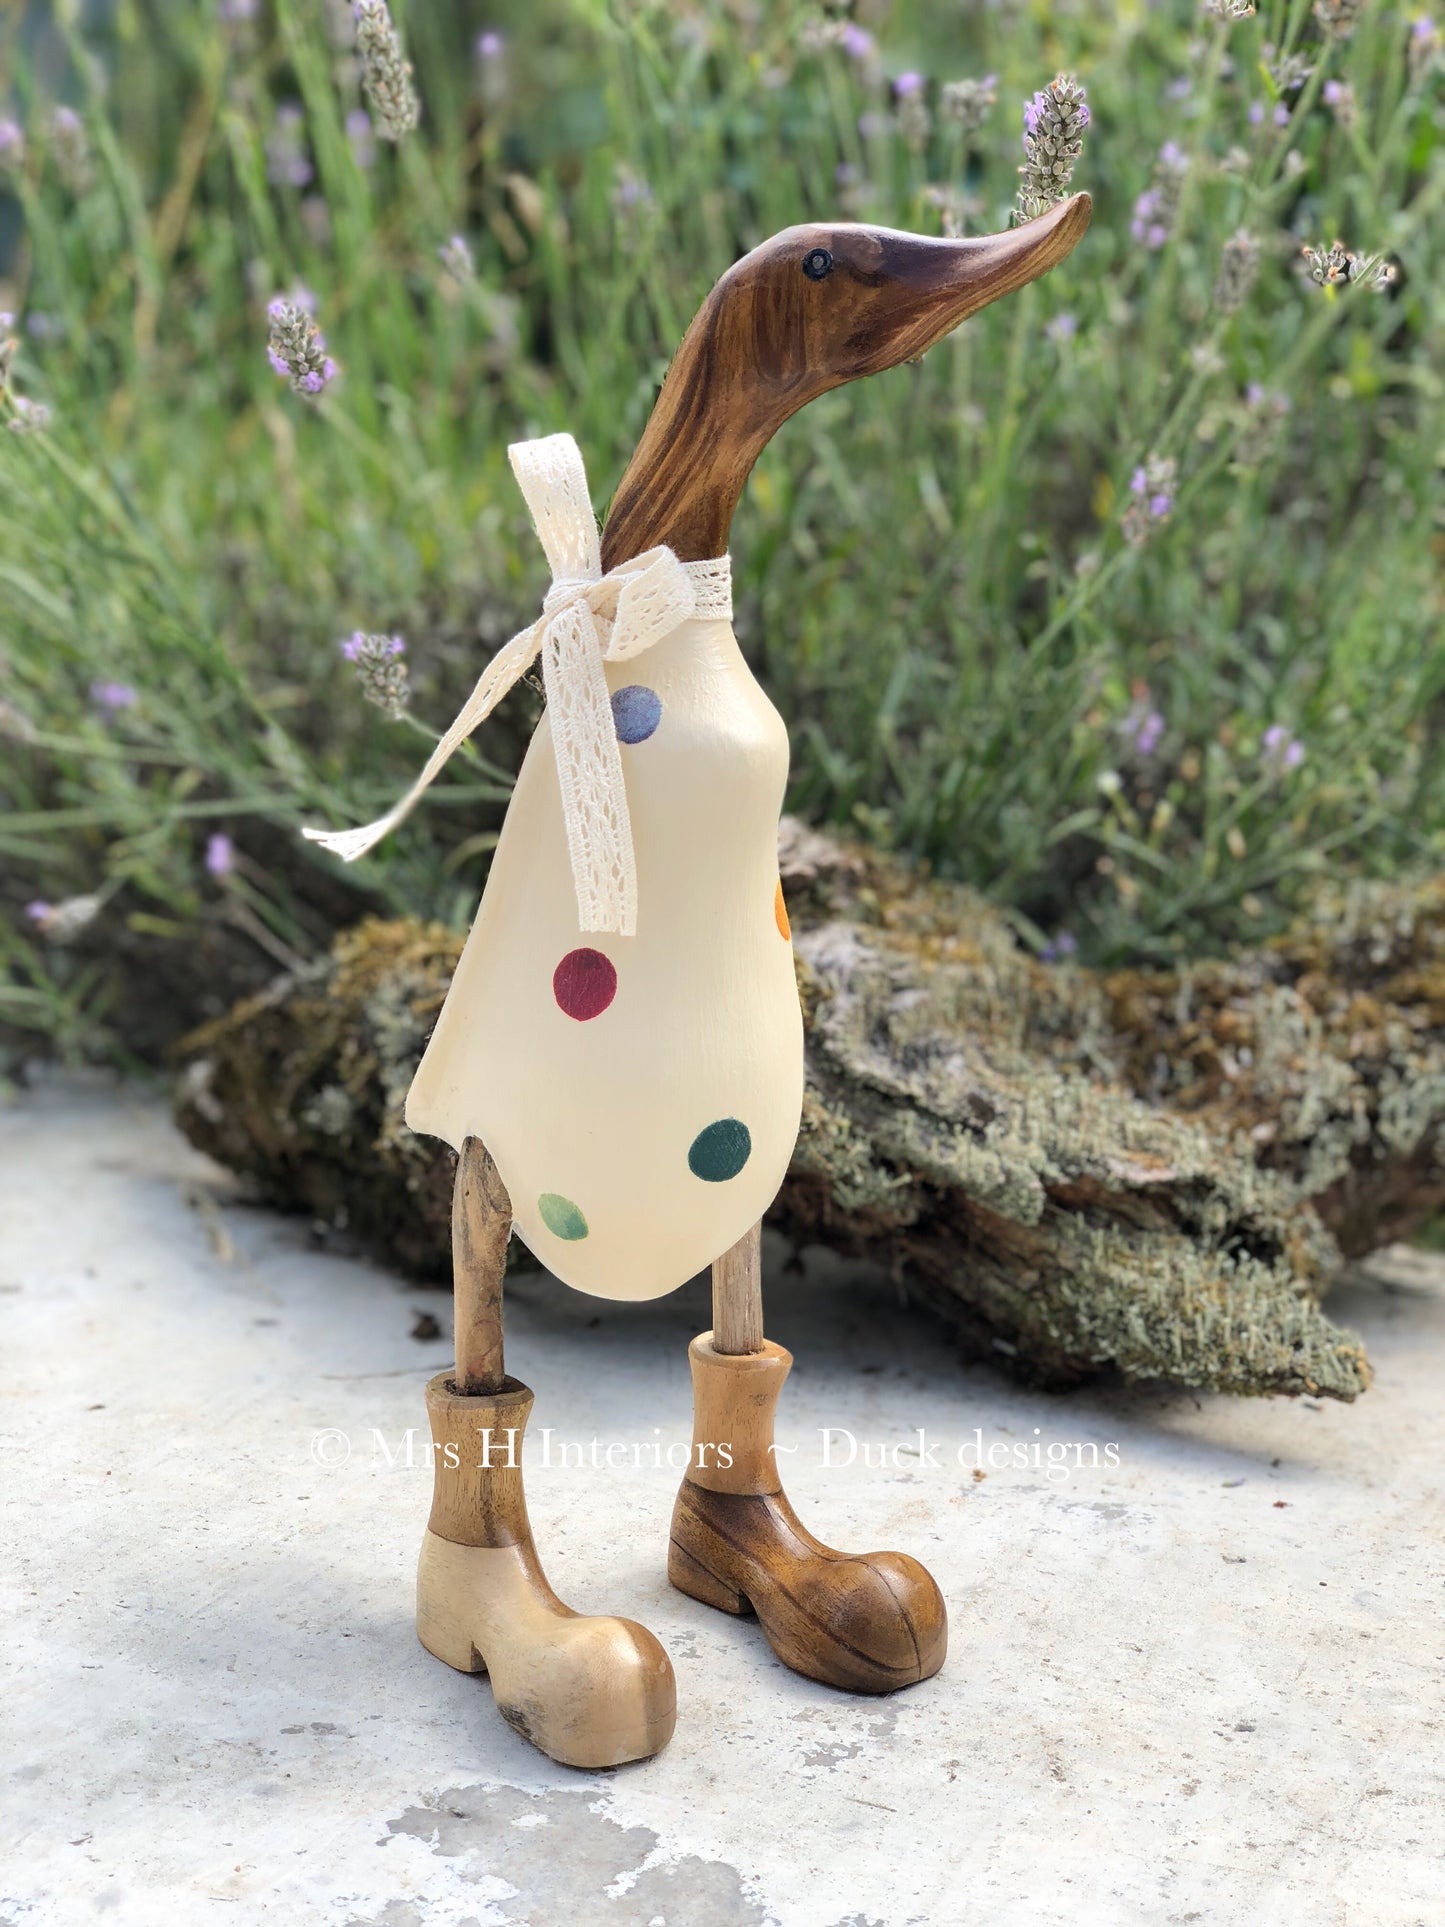 Emma Bridgewater Outdoor Ducks -  - Decorated Wooden Duck in Boots by Mrs H the Duck Lady